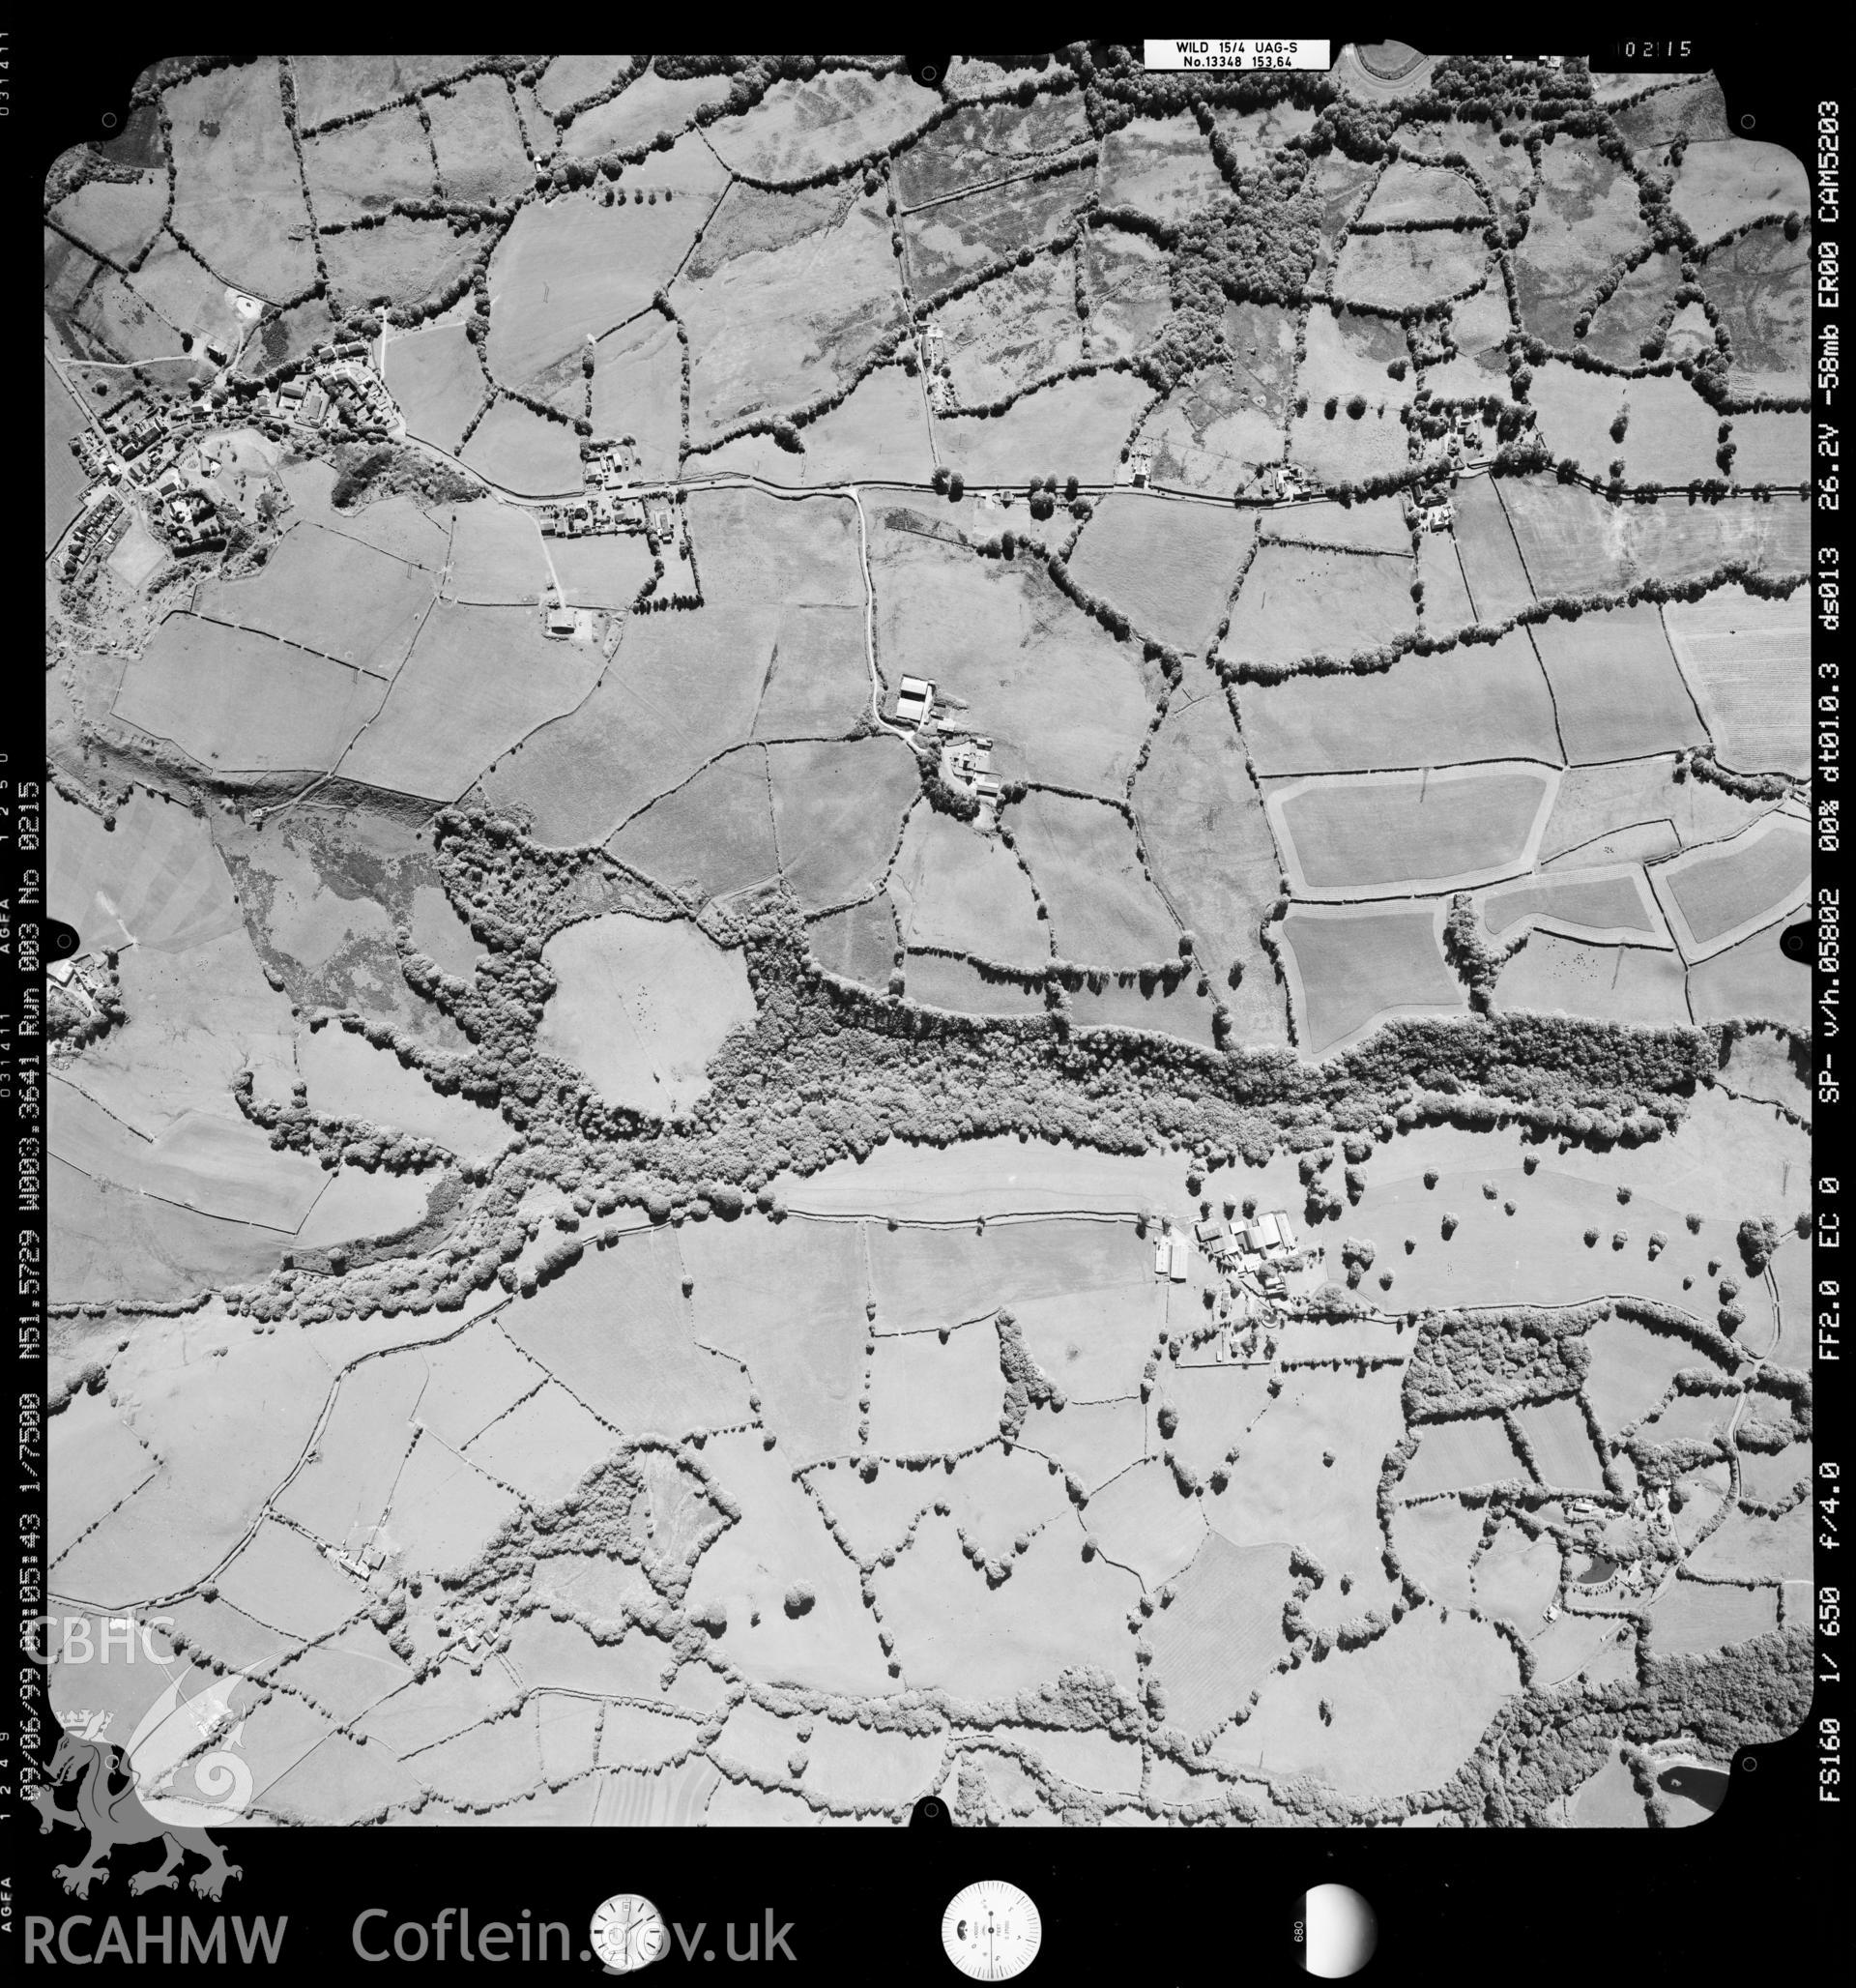 Digitized copy of an aerial photograph showing the Llantrisant area, taken by Ordnance Survey, 1999.